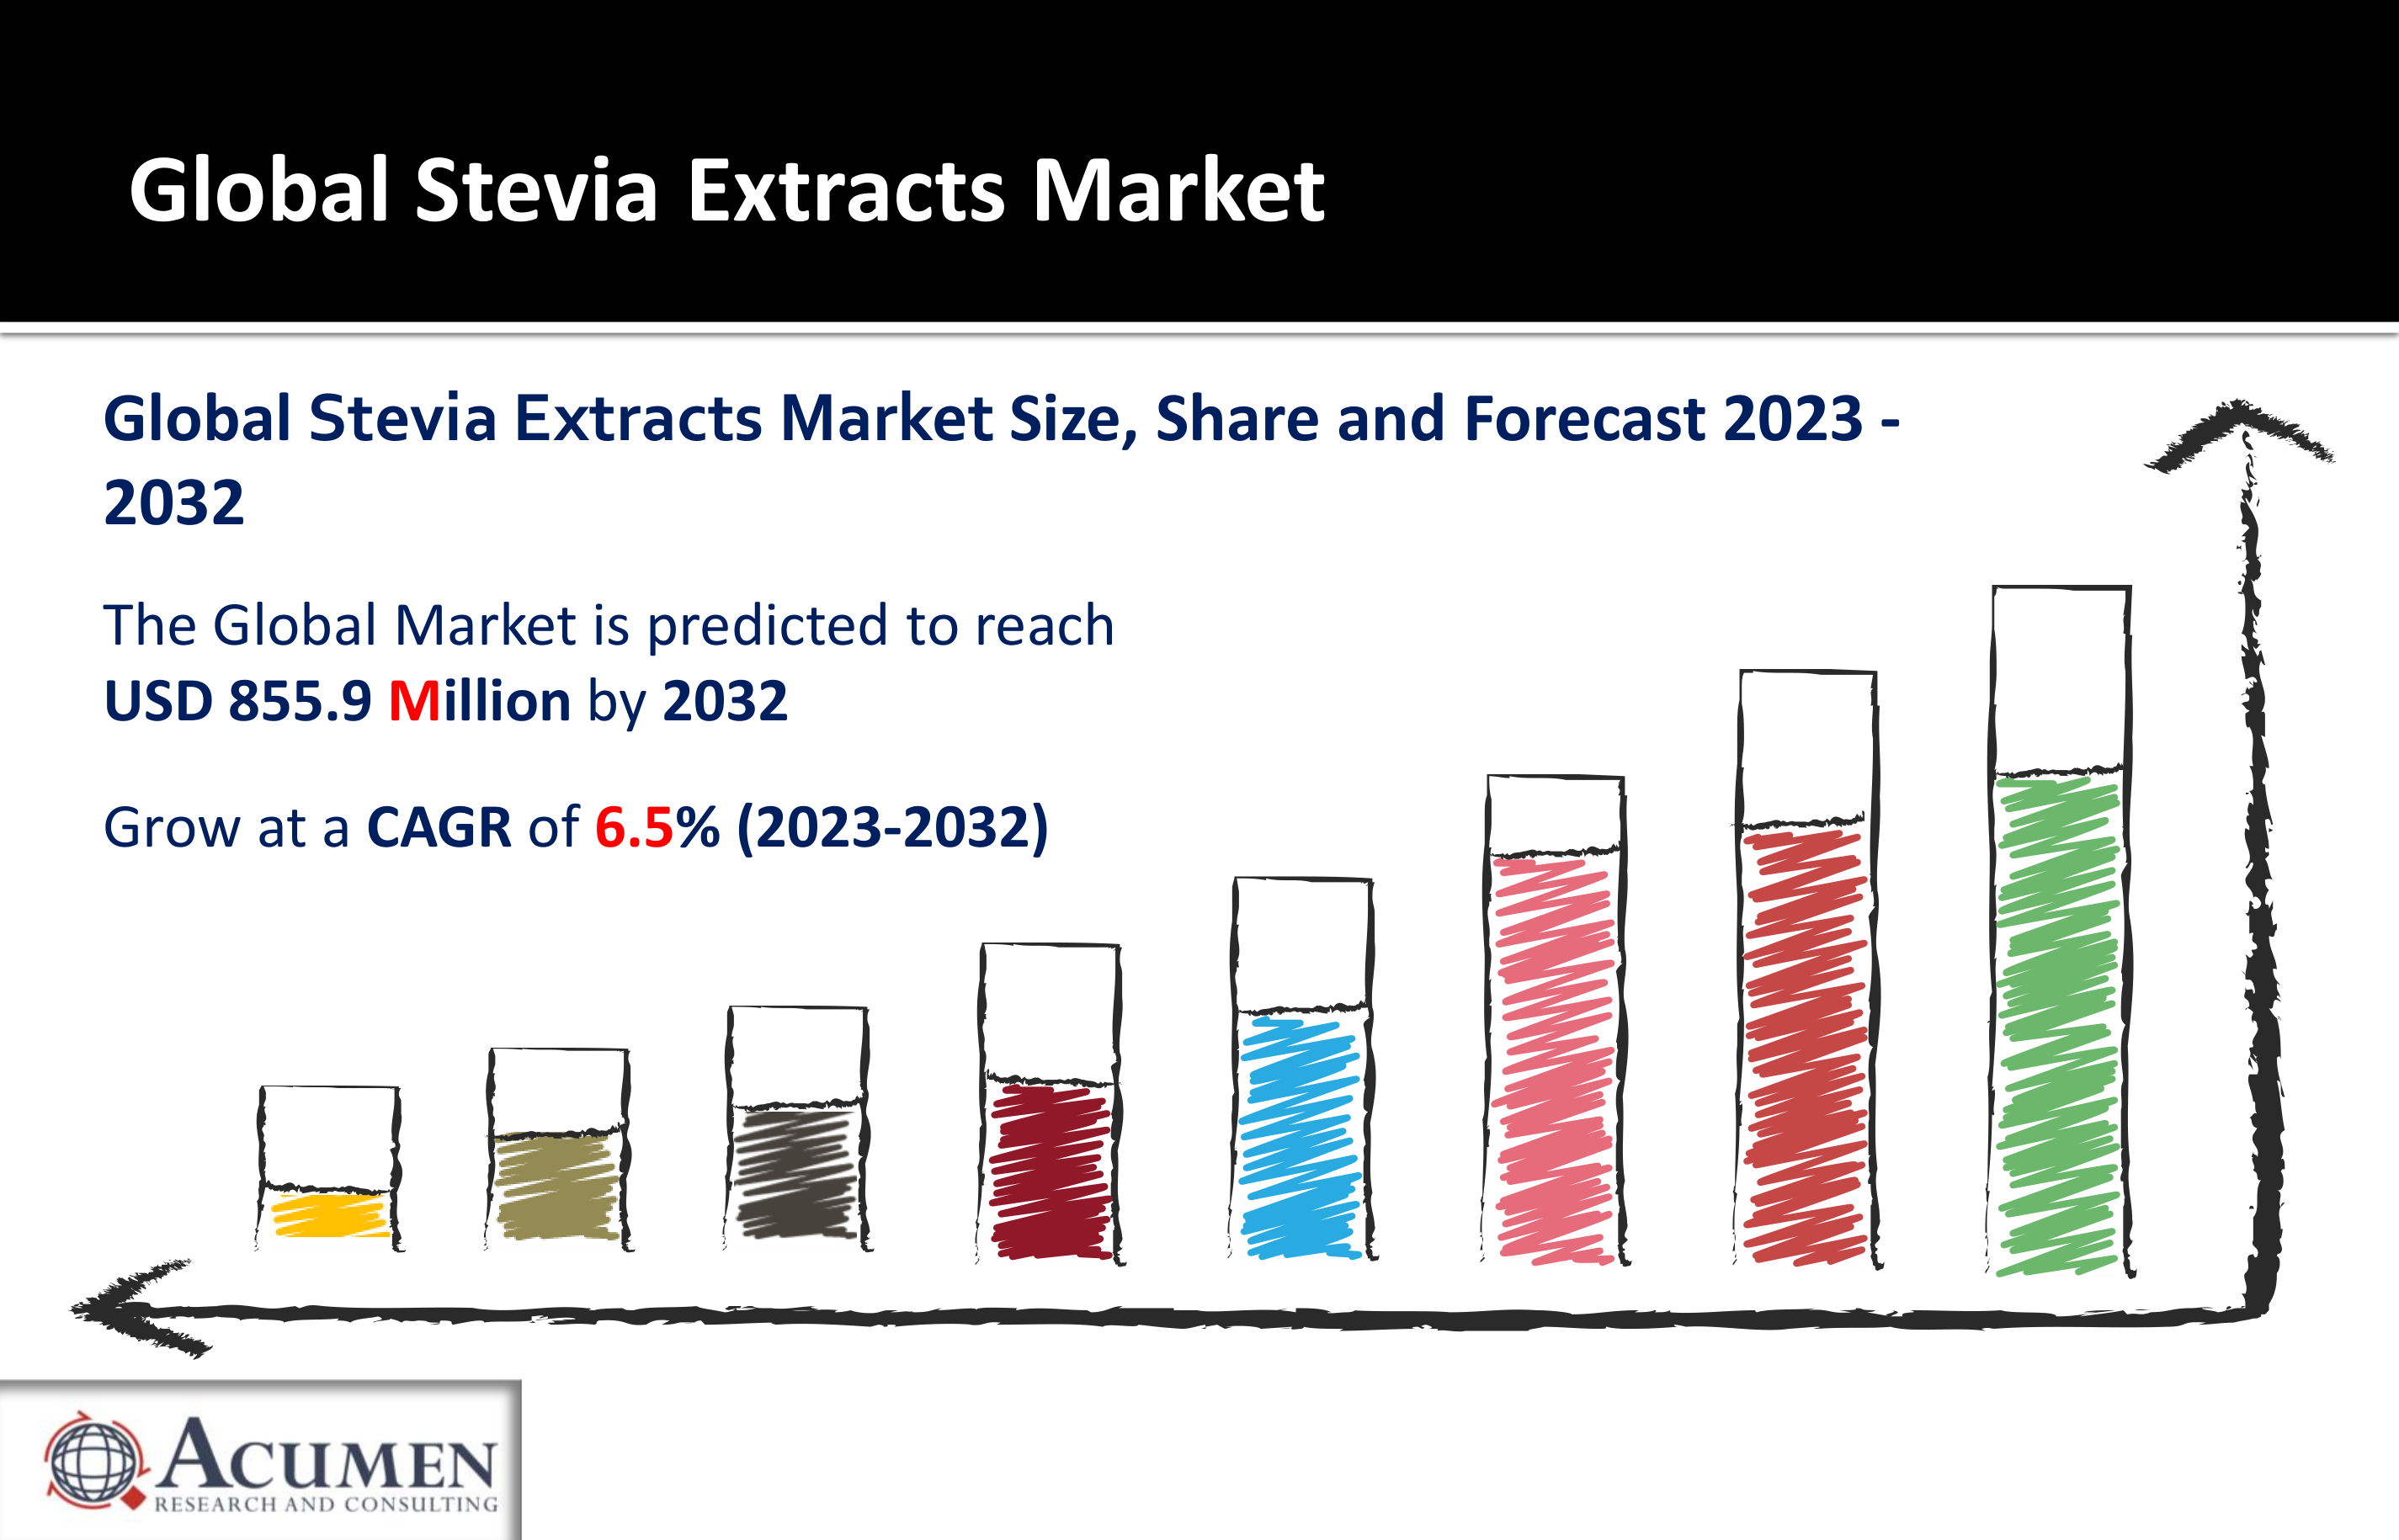 Stevia Extracts Market Was Worth USD 855.9 Million in 2032, with a 6.5% CAGR